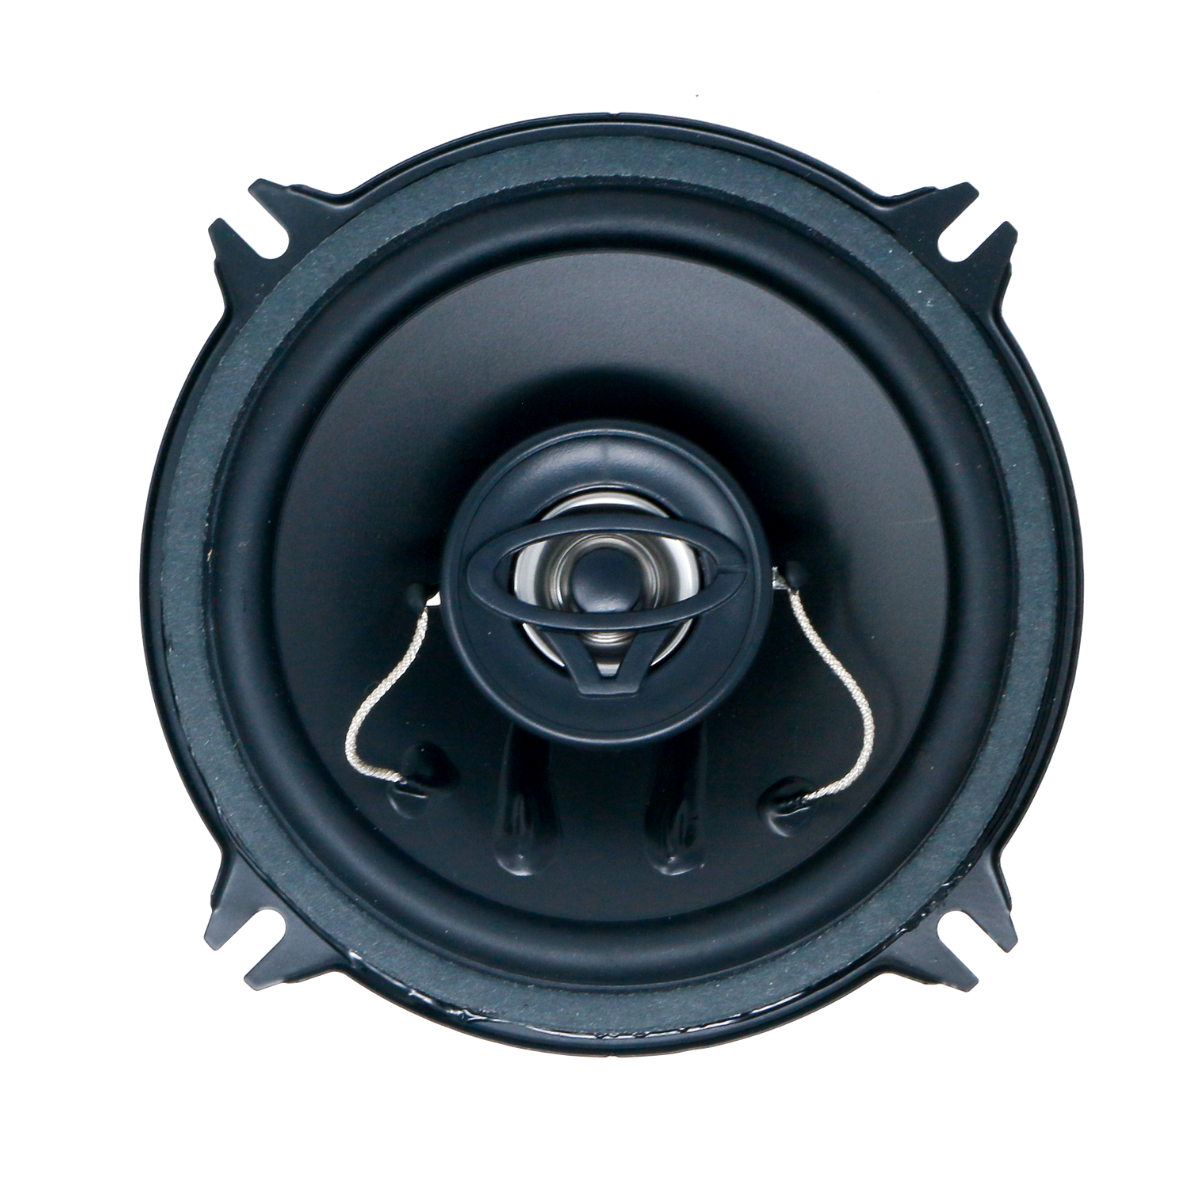 XED42 - 250W 4" 2-Way XED Series Coaxial Car Speakers